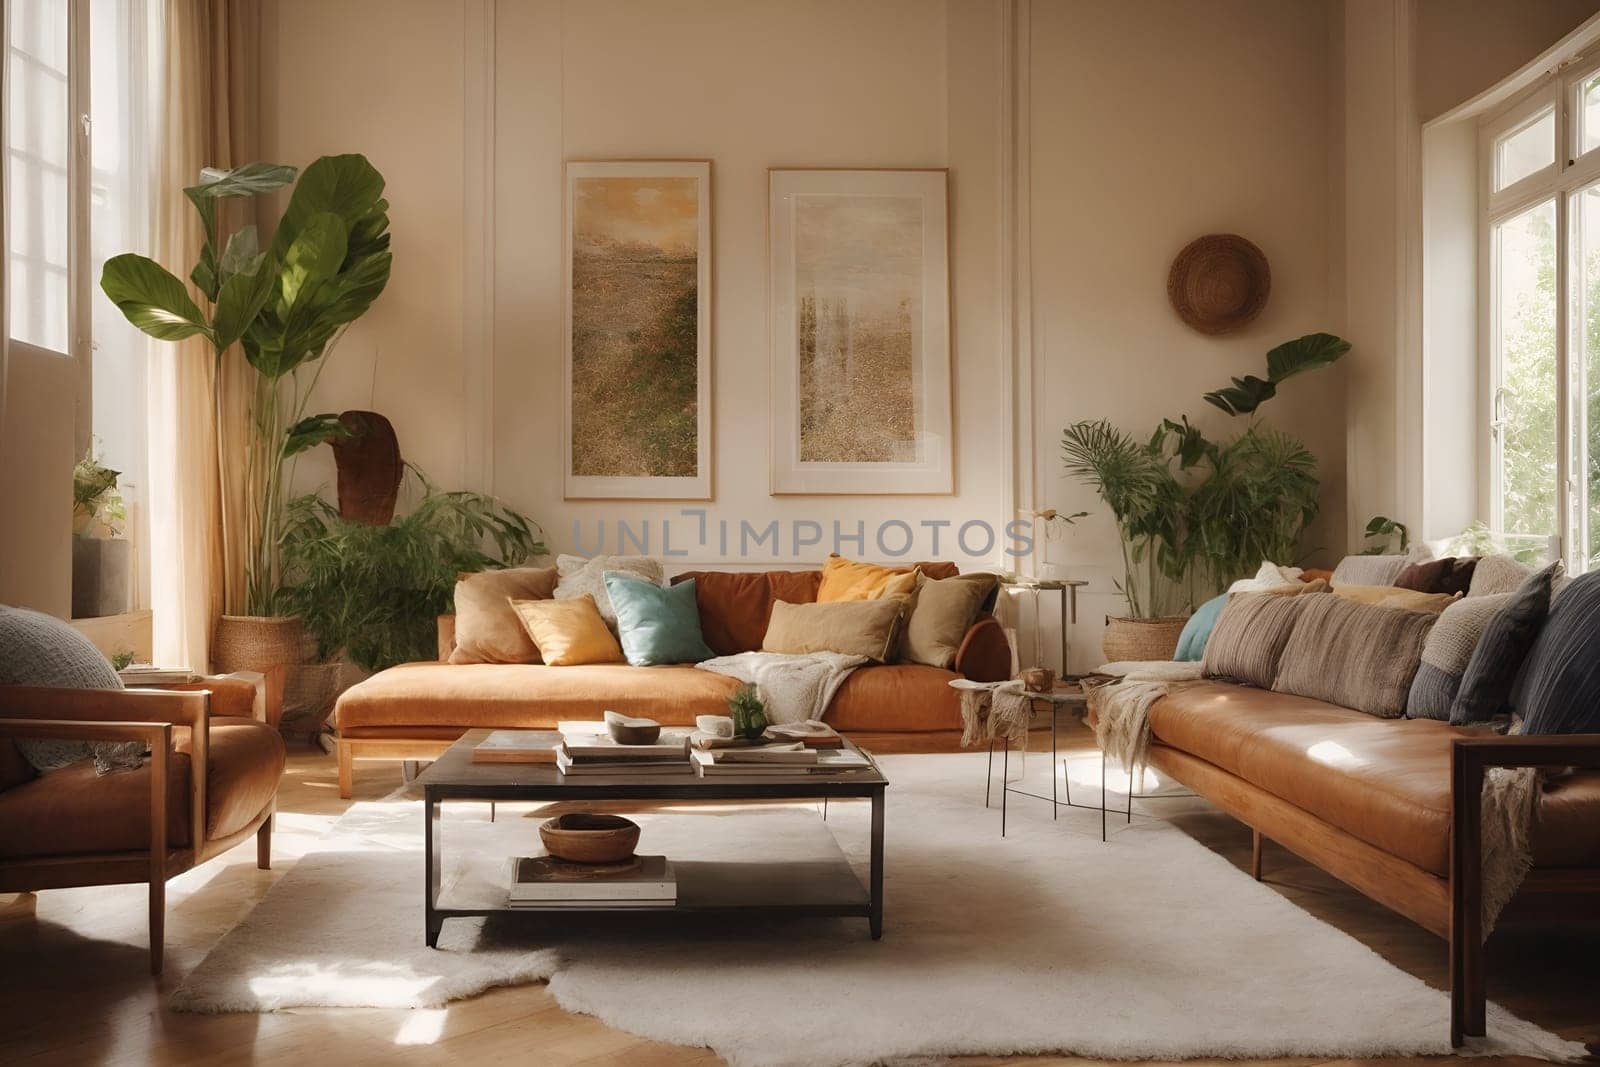 This photo showcases a living room filled with various pieces of furniture and plenty of windows.